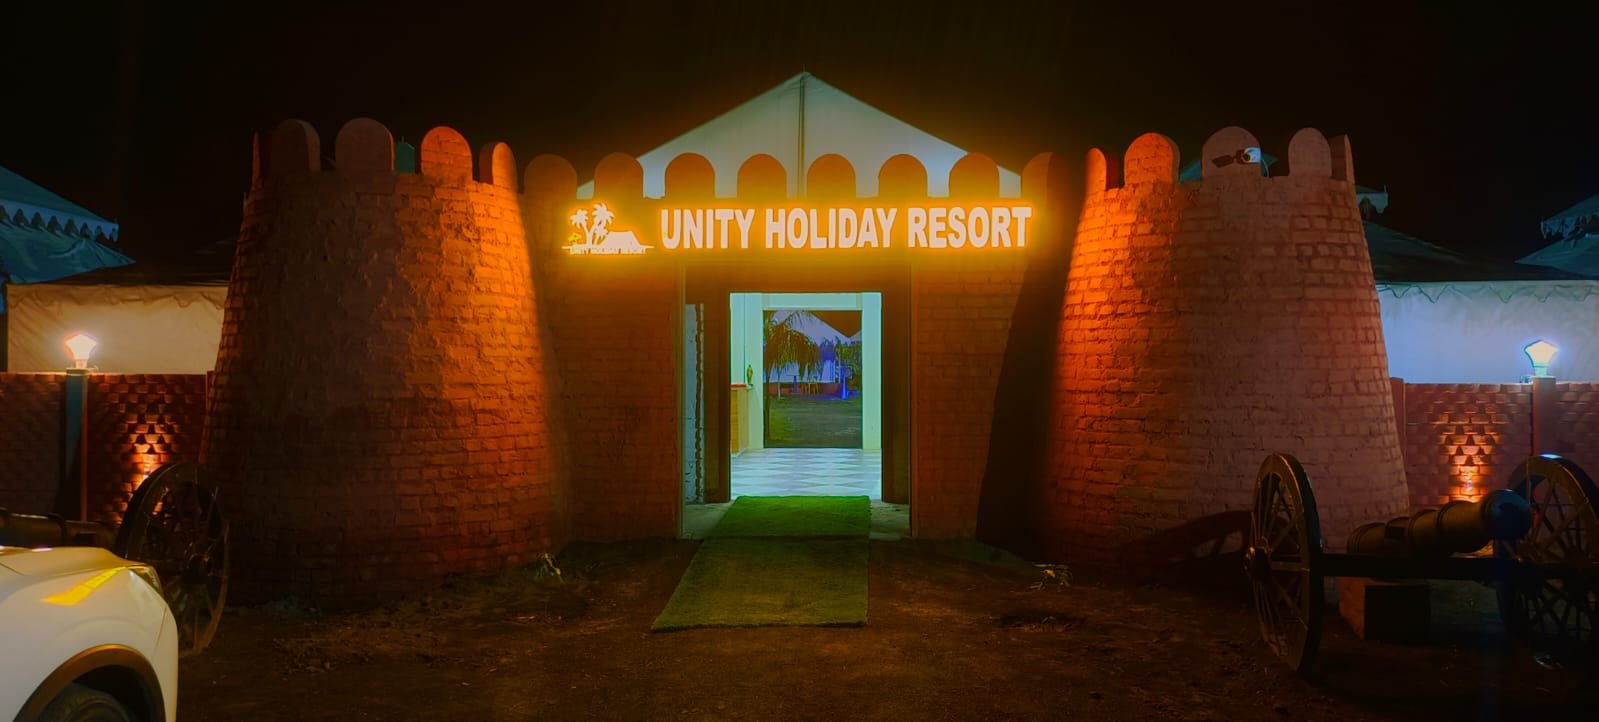 <span  class="uc_style_uc_tiles_grid_image_elementor_uc_items_attribute_title" style="color:#ffffff;">Unity Holiday Resort Online Booking</span>